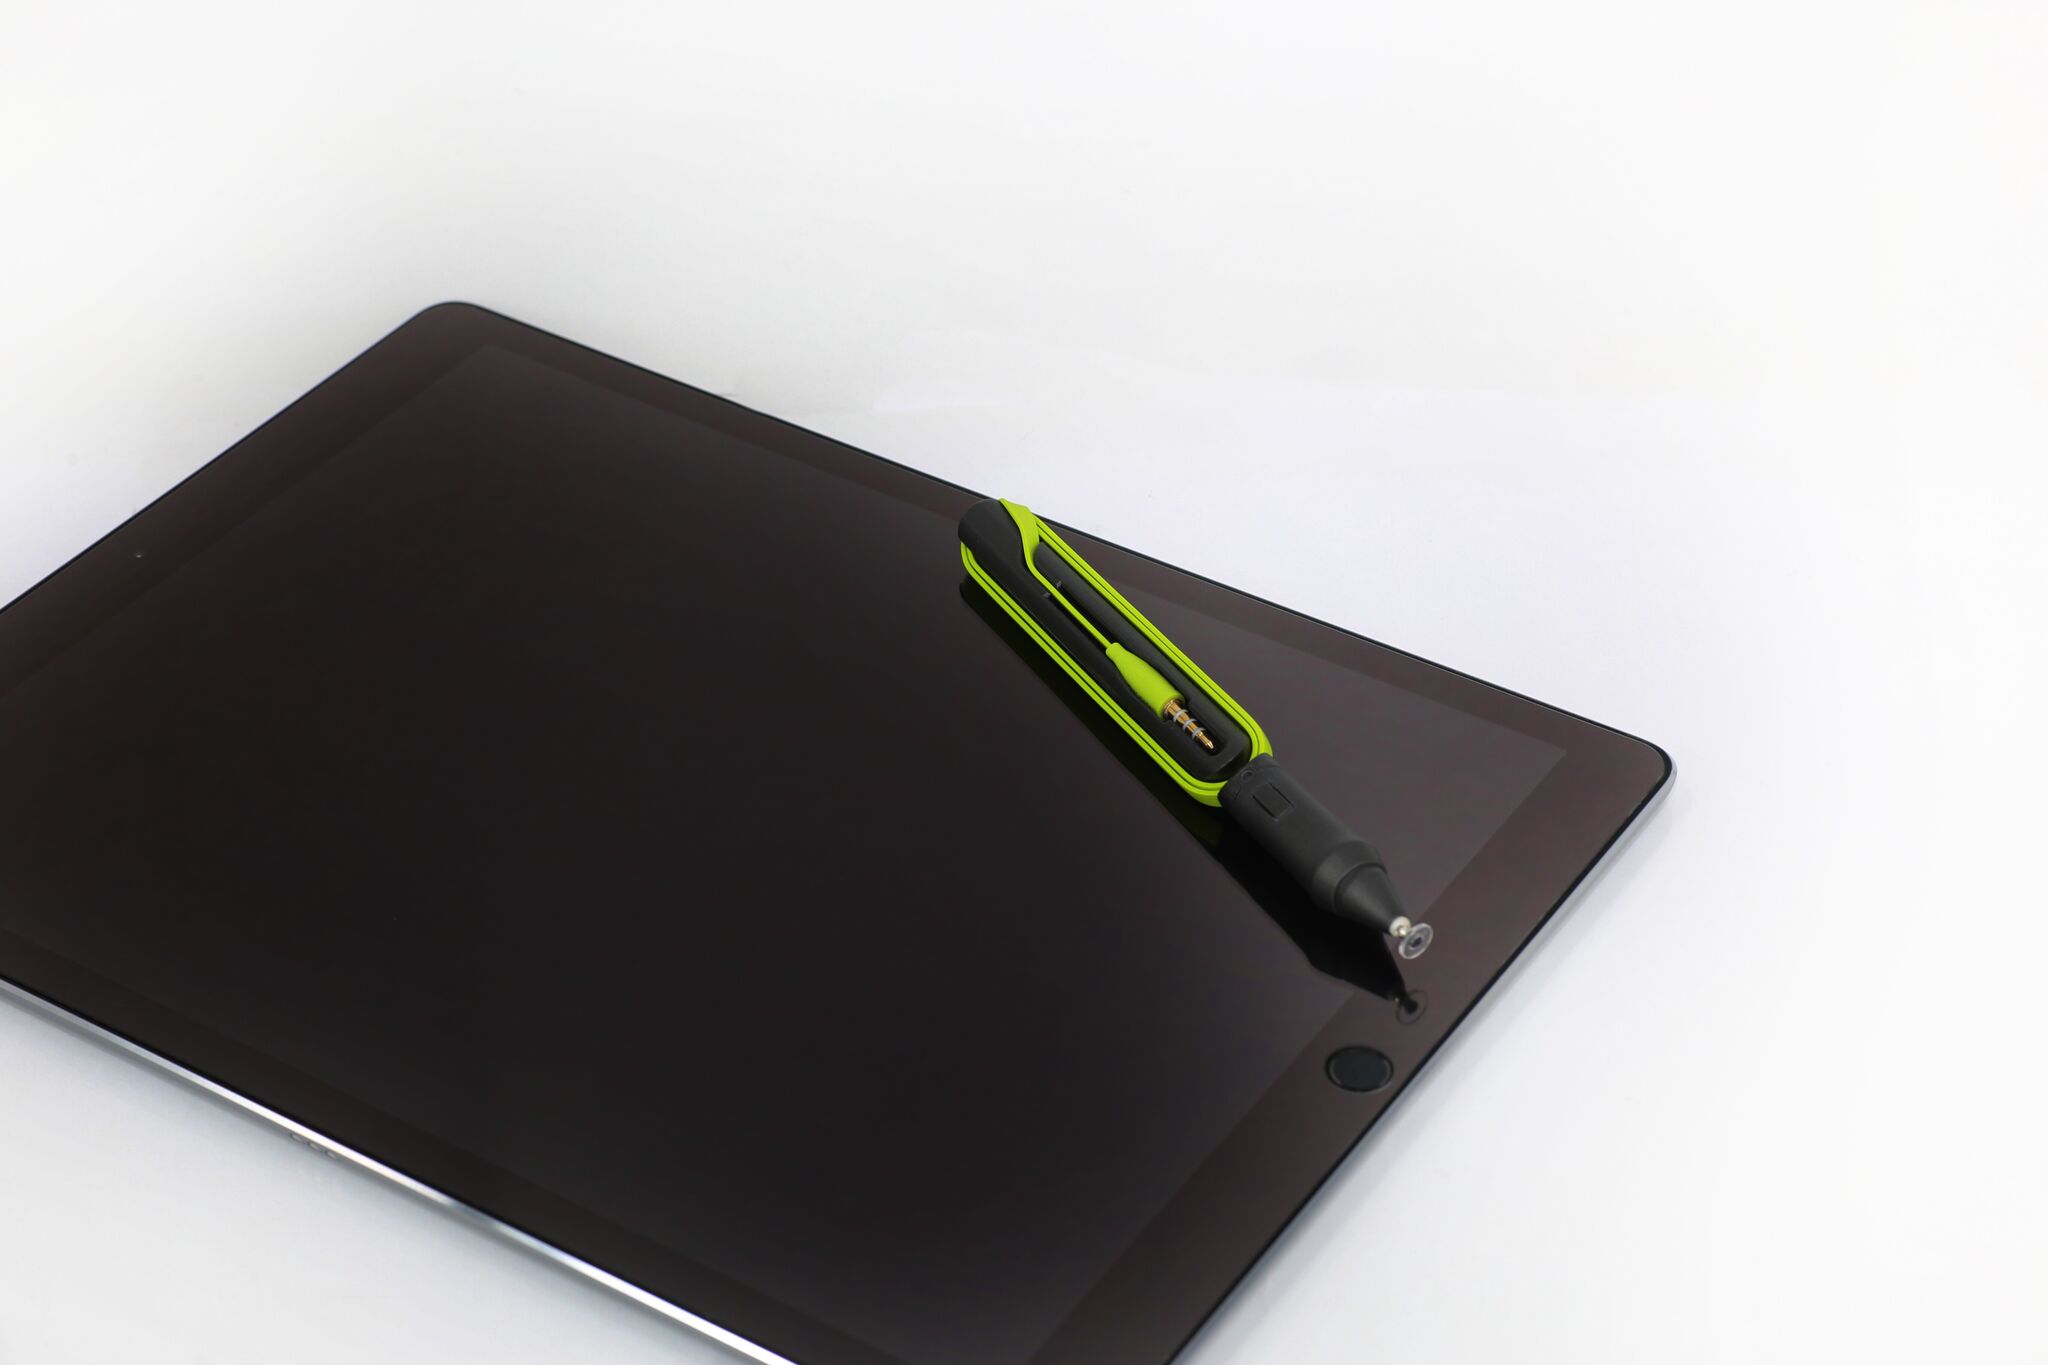 We tried, therefore you don't have to – SonarPen and other third-party  styluses for the iPad